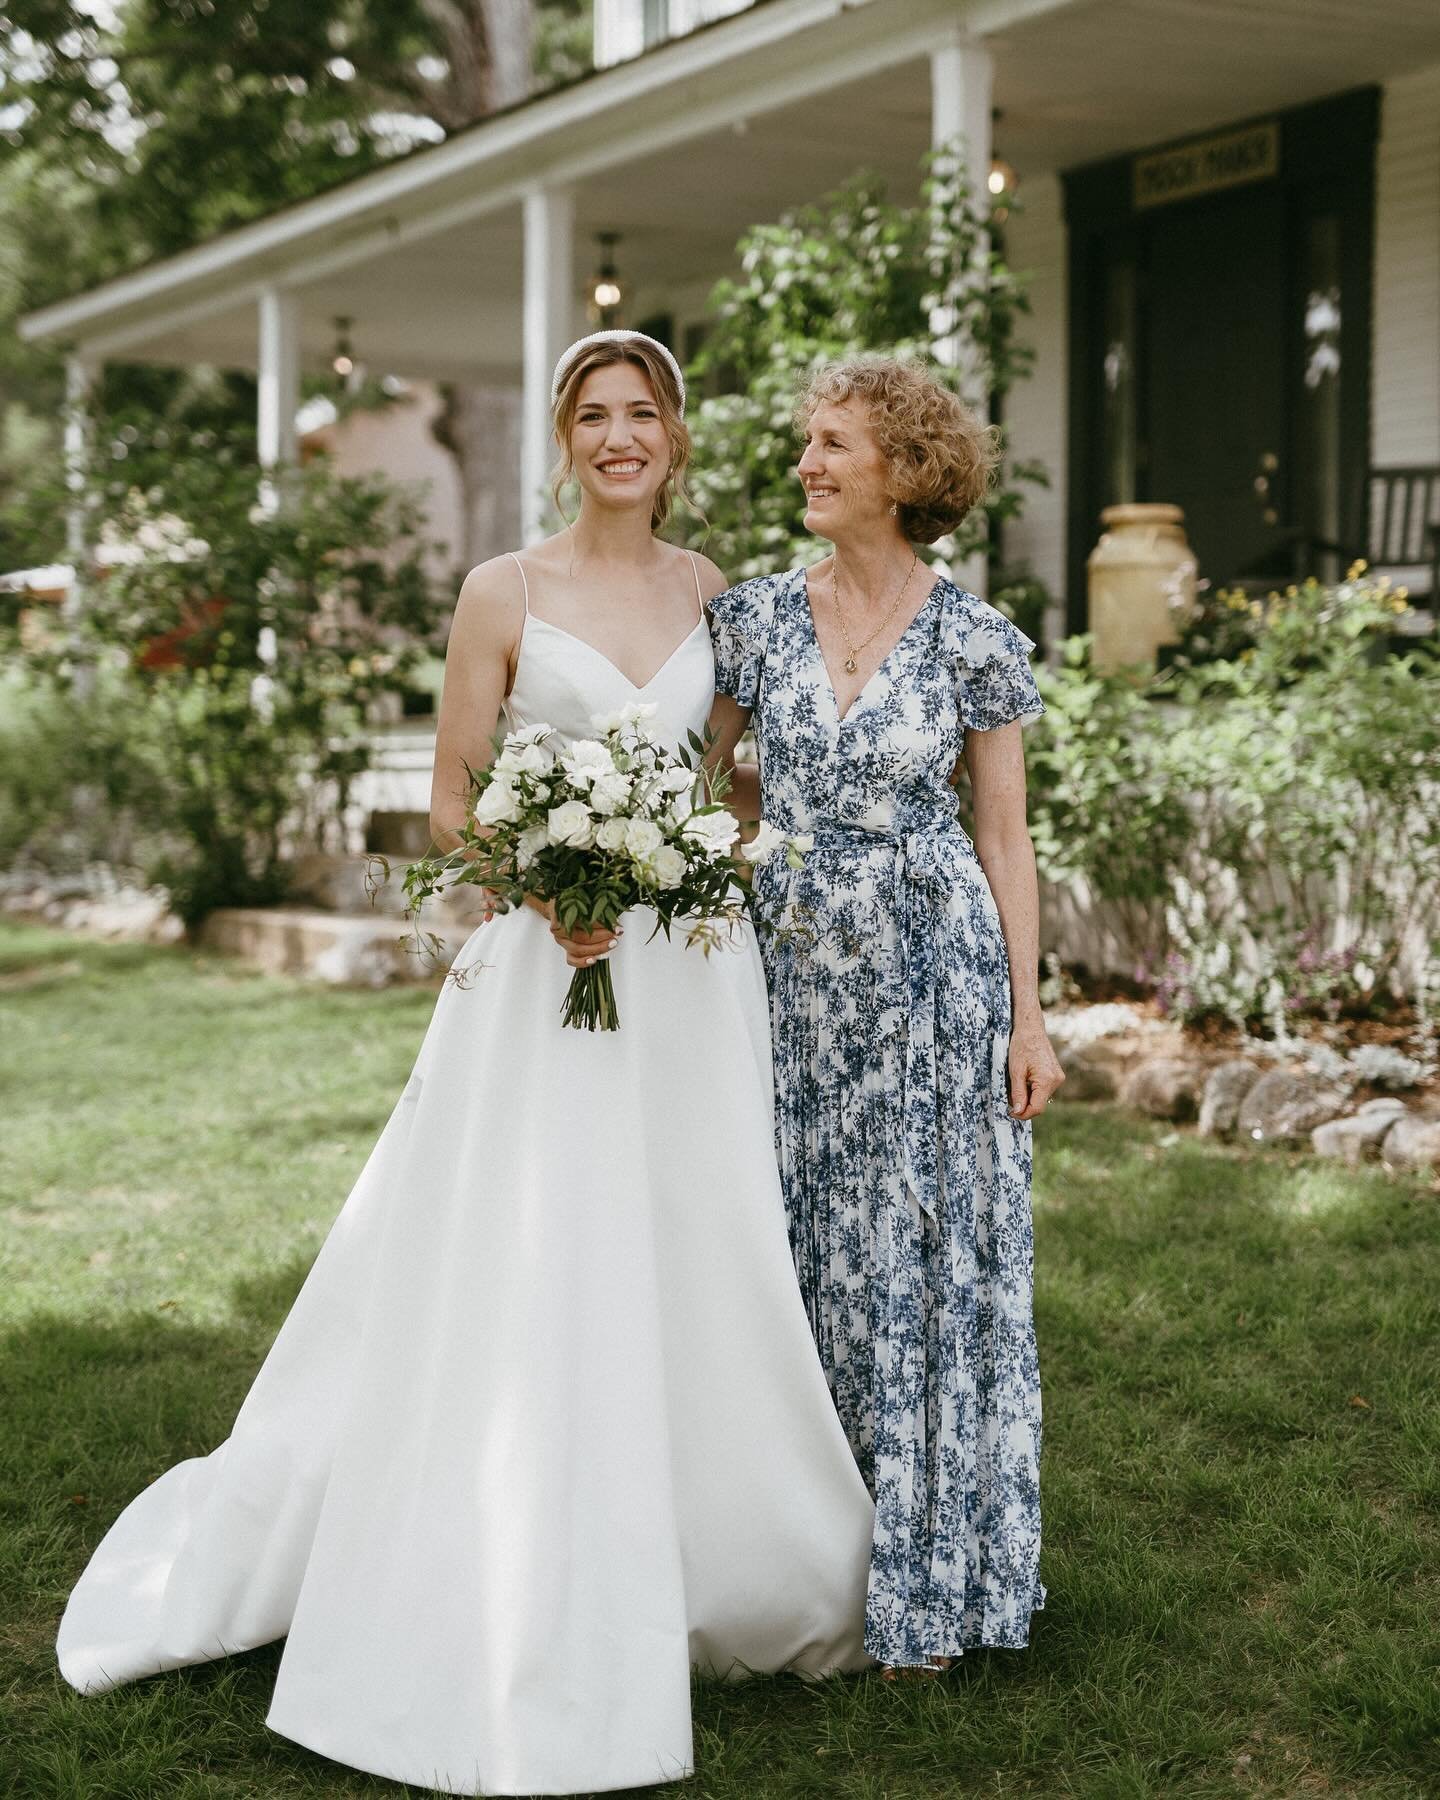 To the guiding lights of our lives, Happy Mother&rsquo;s Day! Today, we celebrate the women who have stood by our side through every step of our journey. From the first twirl in a wedding dress to the heartfelt embraces on the big day, your love know